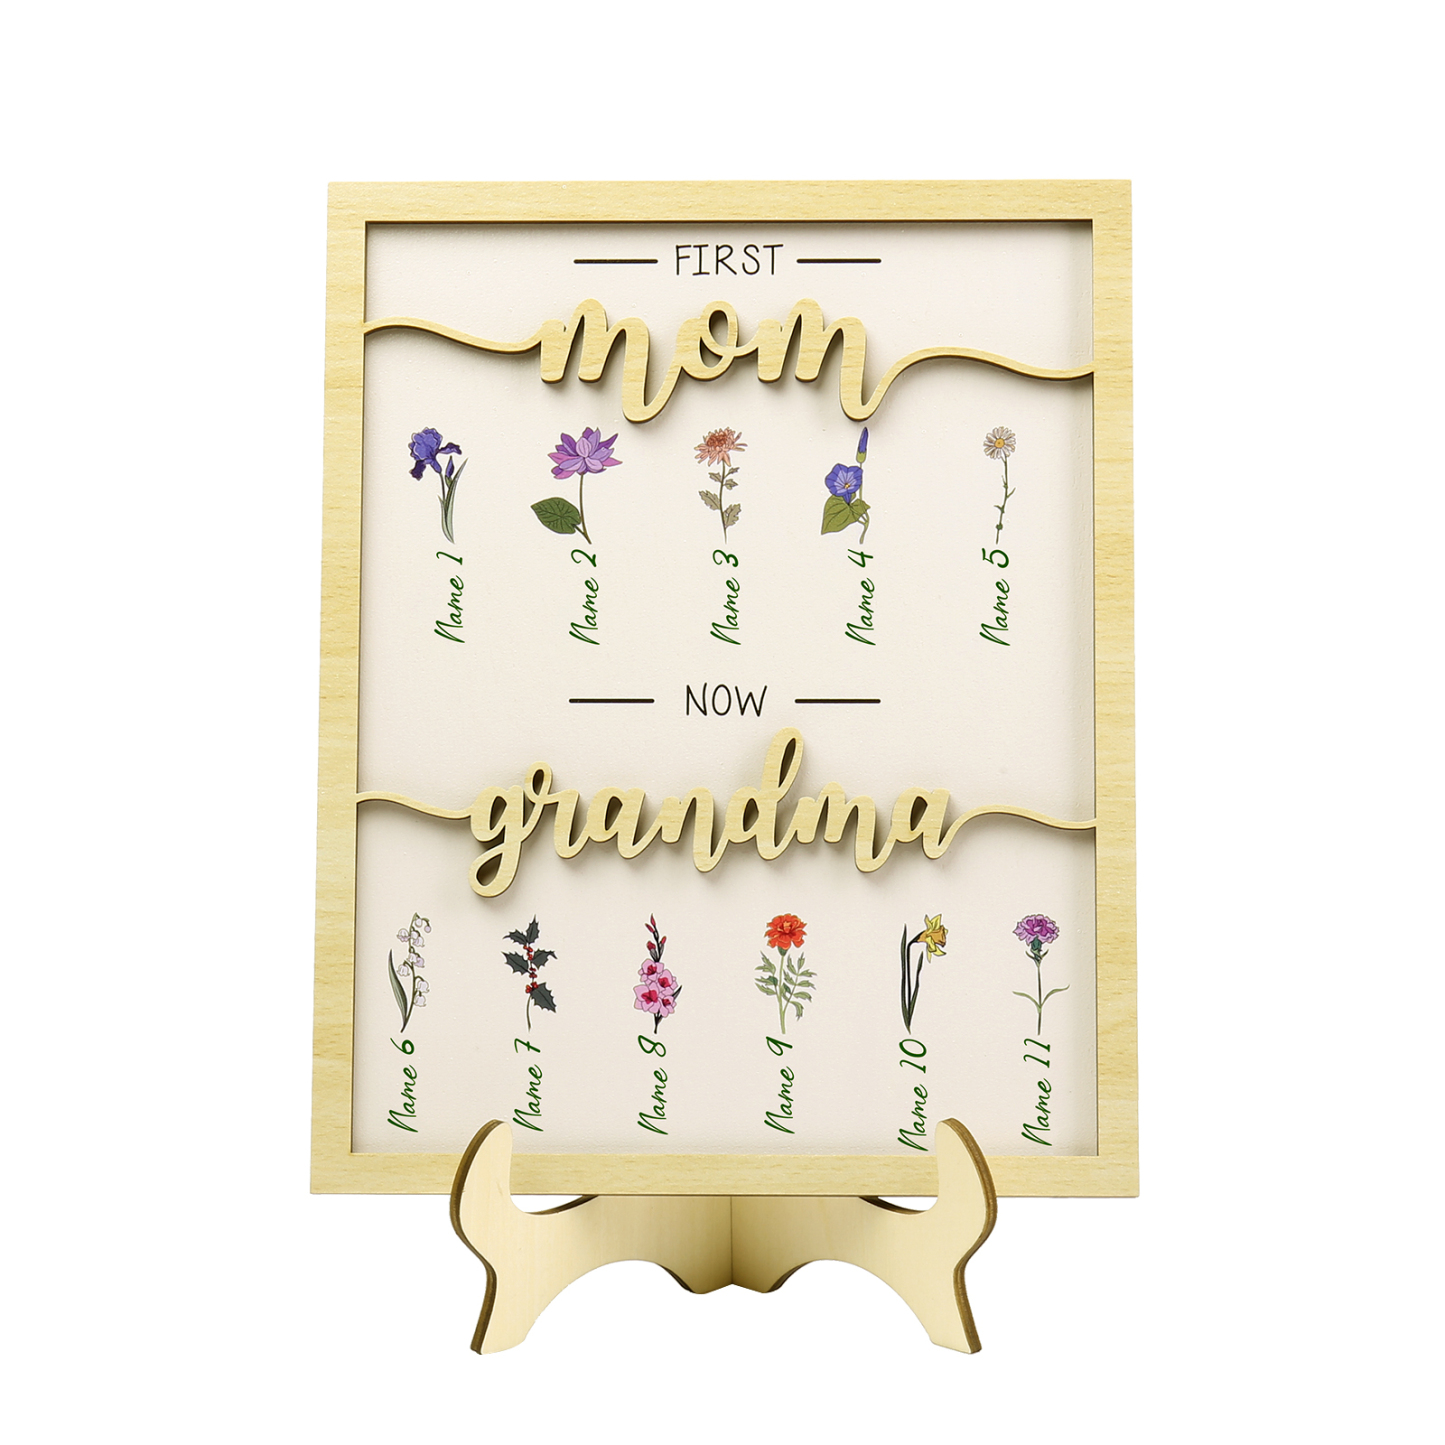 11 Names - Personalized Customized Birth Flower Home Frame Wooden Decoration for Mom/Grandma